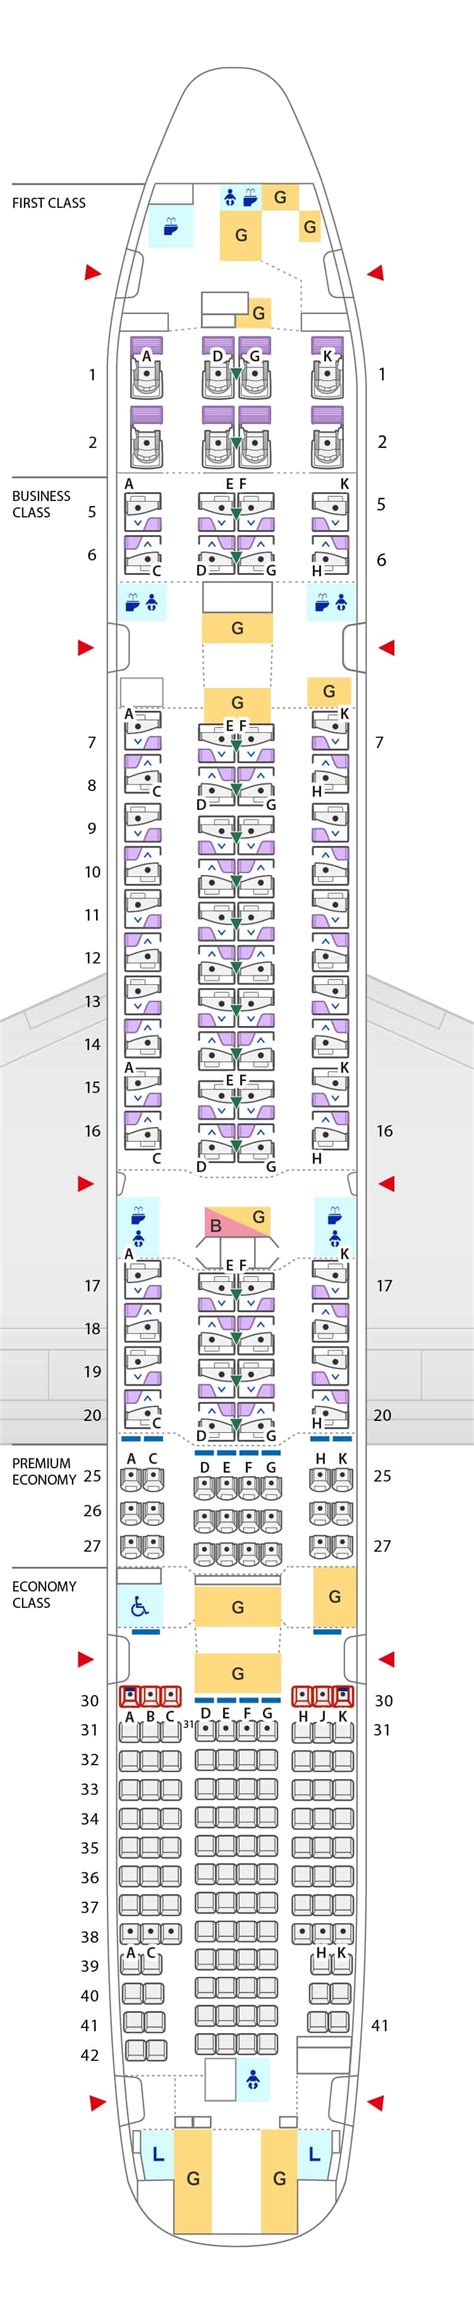 boeing 777-300 seating chart